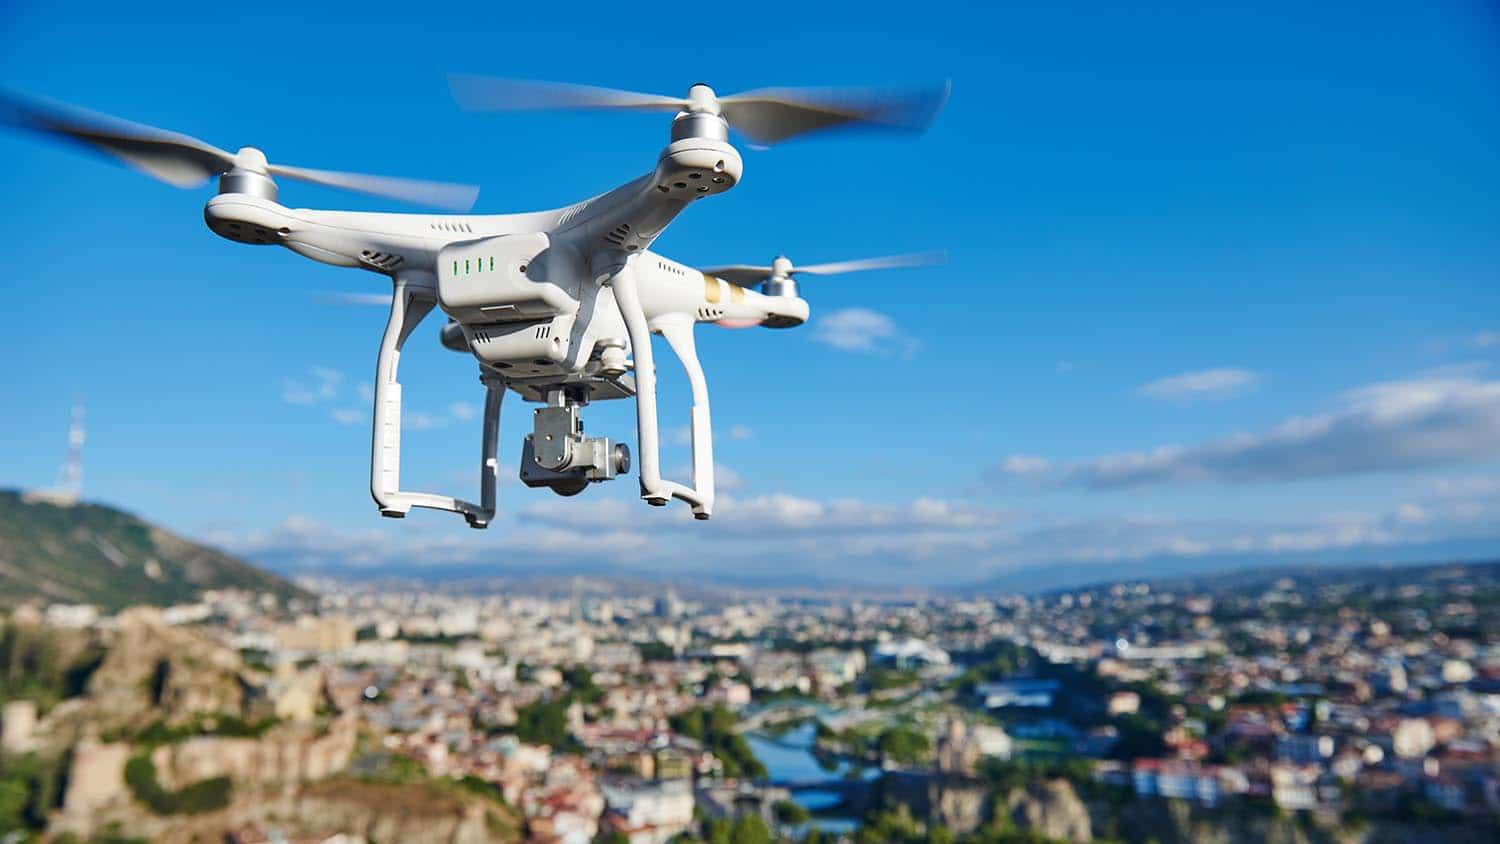 The Uniform Law Commission threatens drone use and innovation